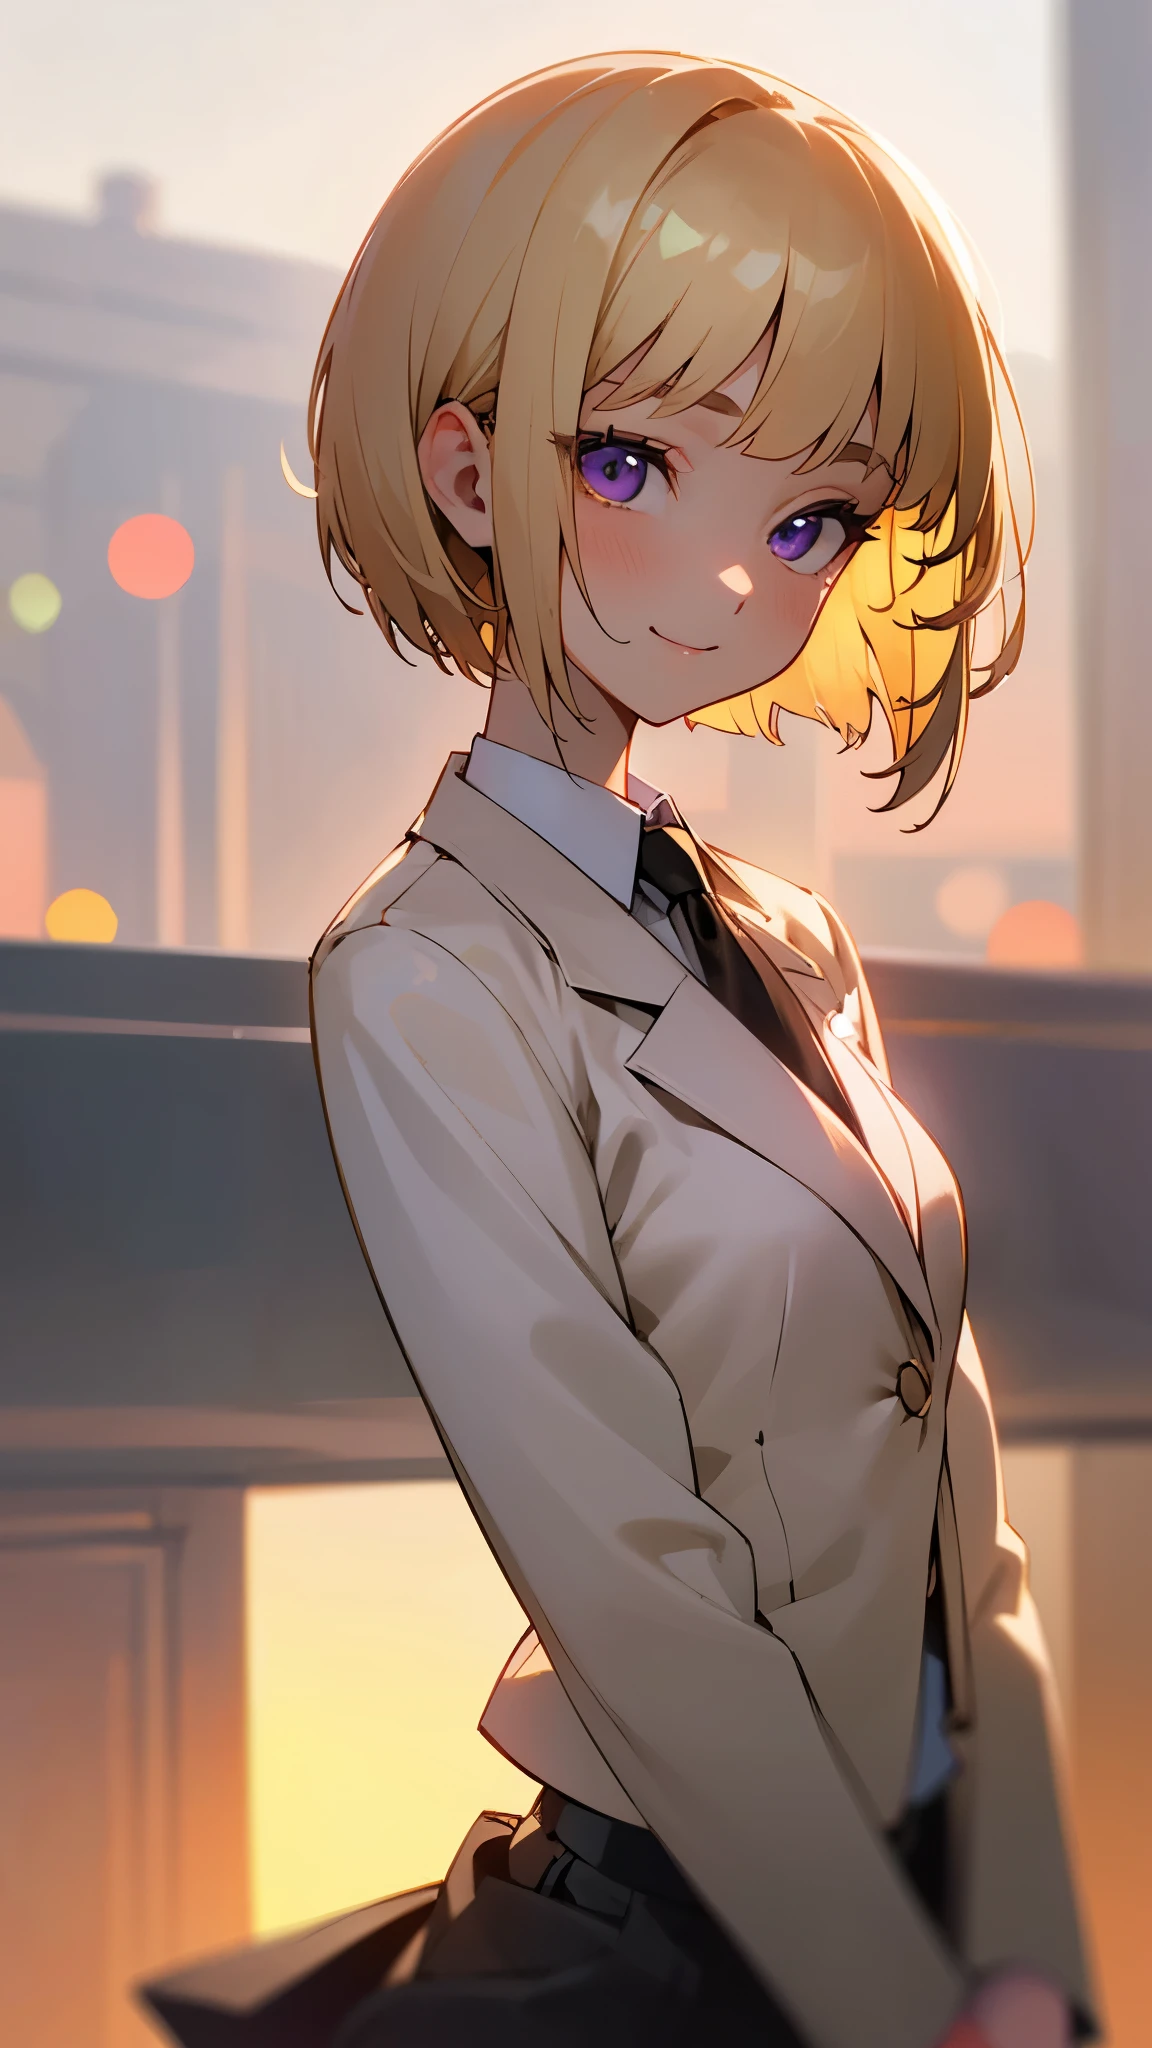 1 Girl、8k、Sharp focus、(Bokeh) (highest quality) (Detailed skin:1.3) (Intricate details) (anime)、(blonde)、short hair、Bobcut、Blunt bangs、Beautiful purple eyes、Slender body、From the side、Upper body close-up、White shirt、Black work trousers、Black Fitted Blazer、Calm face、Mouth closed、Cheeky Smile、Squint your eyes、Park in the background、sunset、Soft lighting.